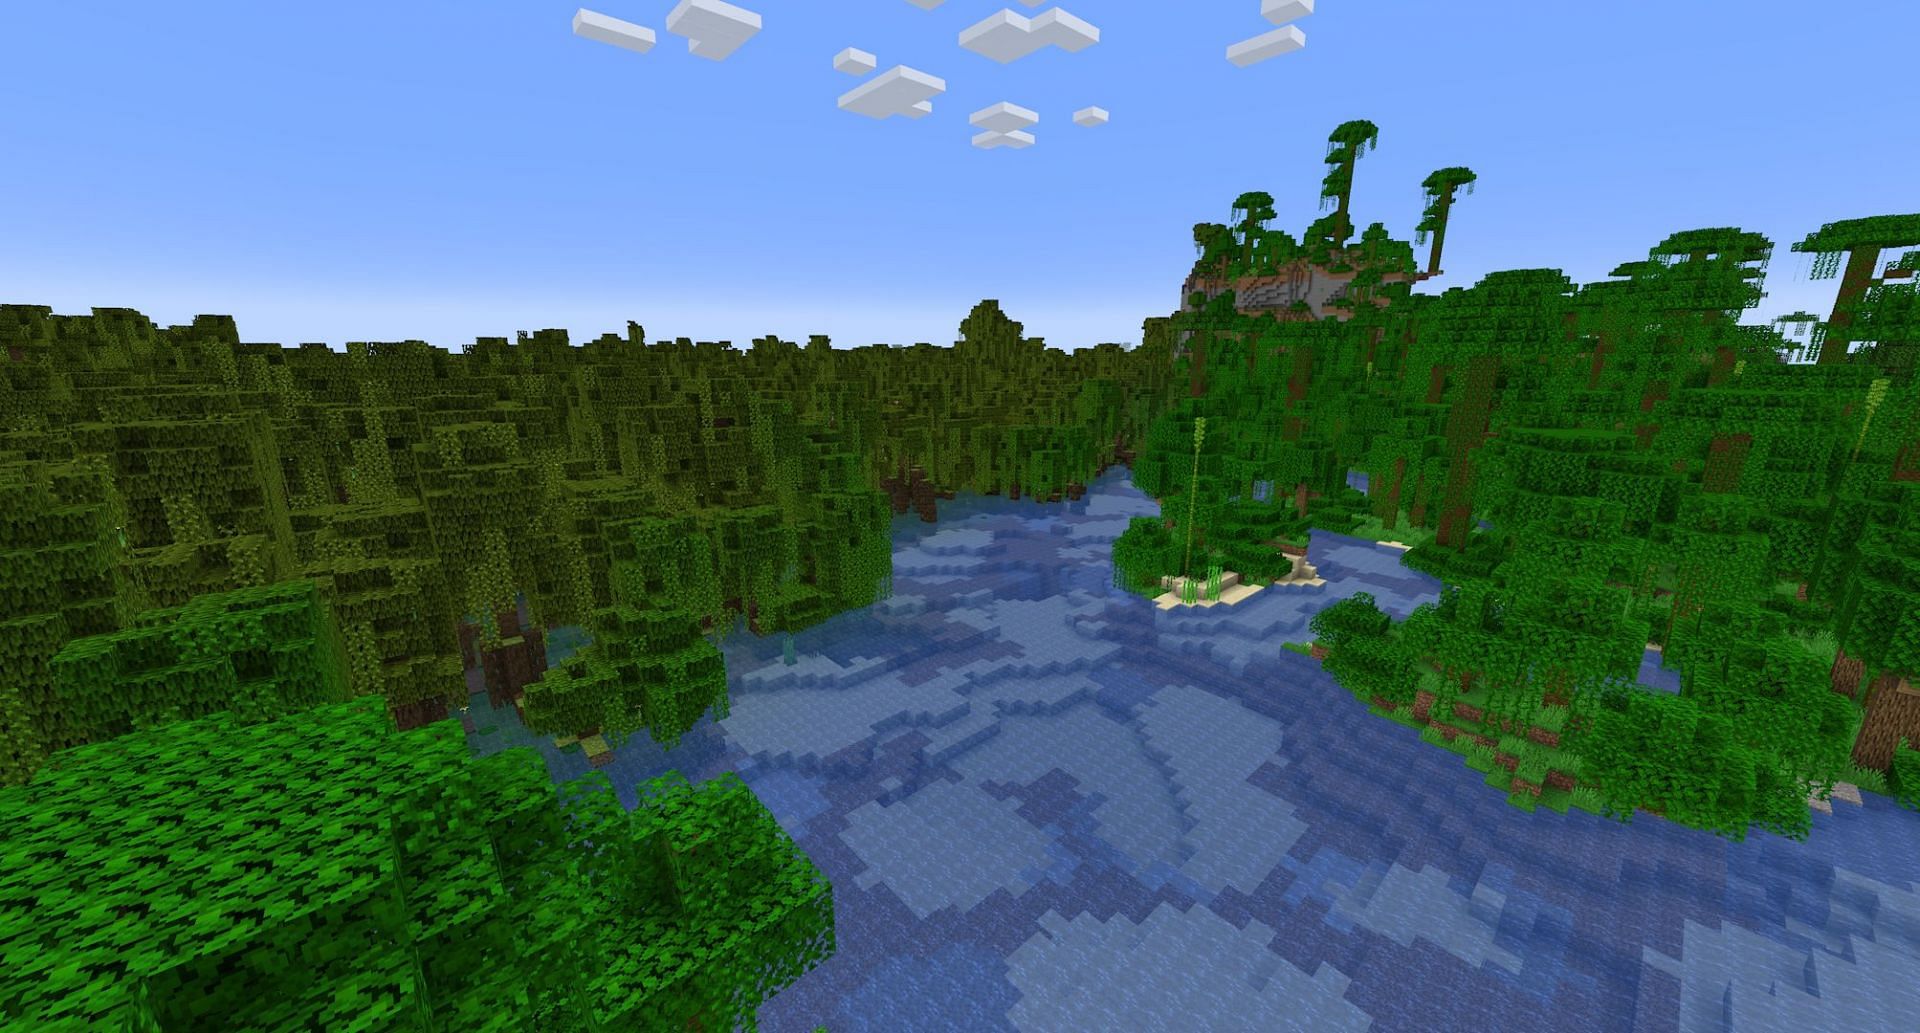 The meeting place of the seed&#039;s jungle and mangrove swamp (Image via Mojang)